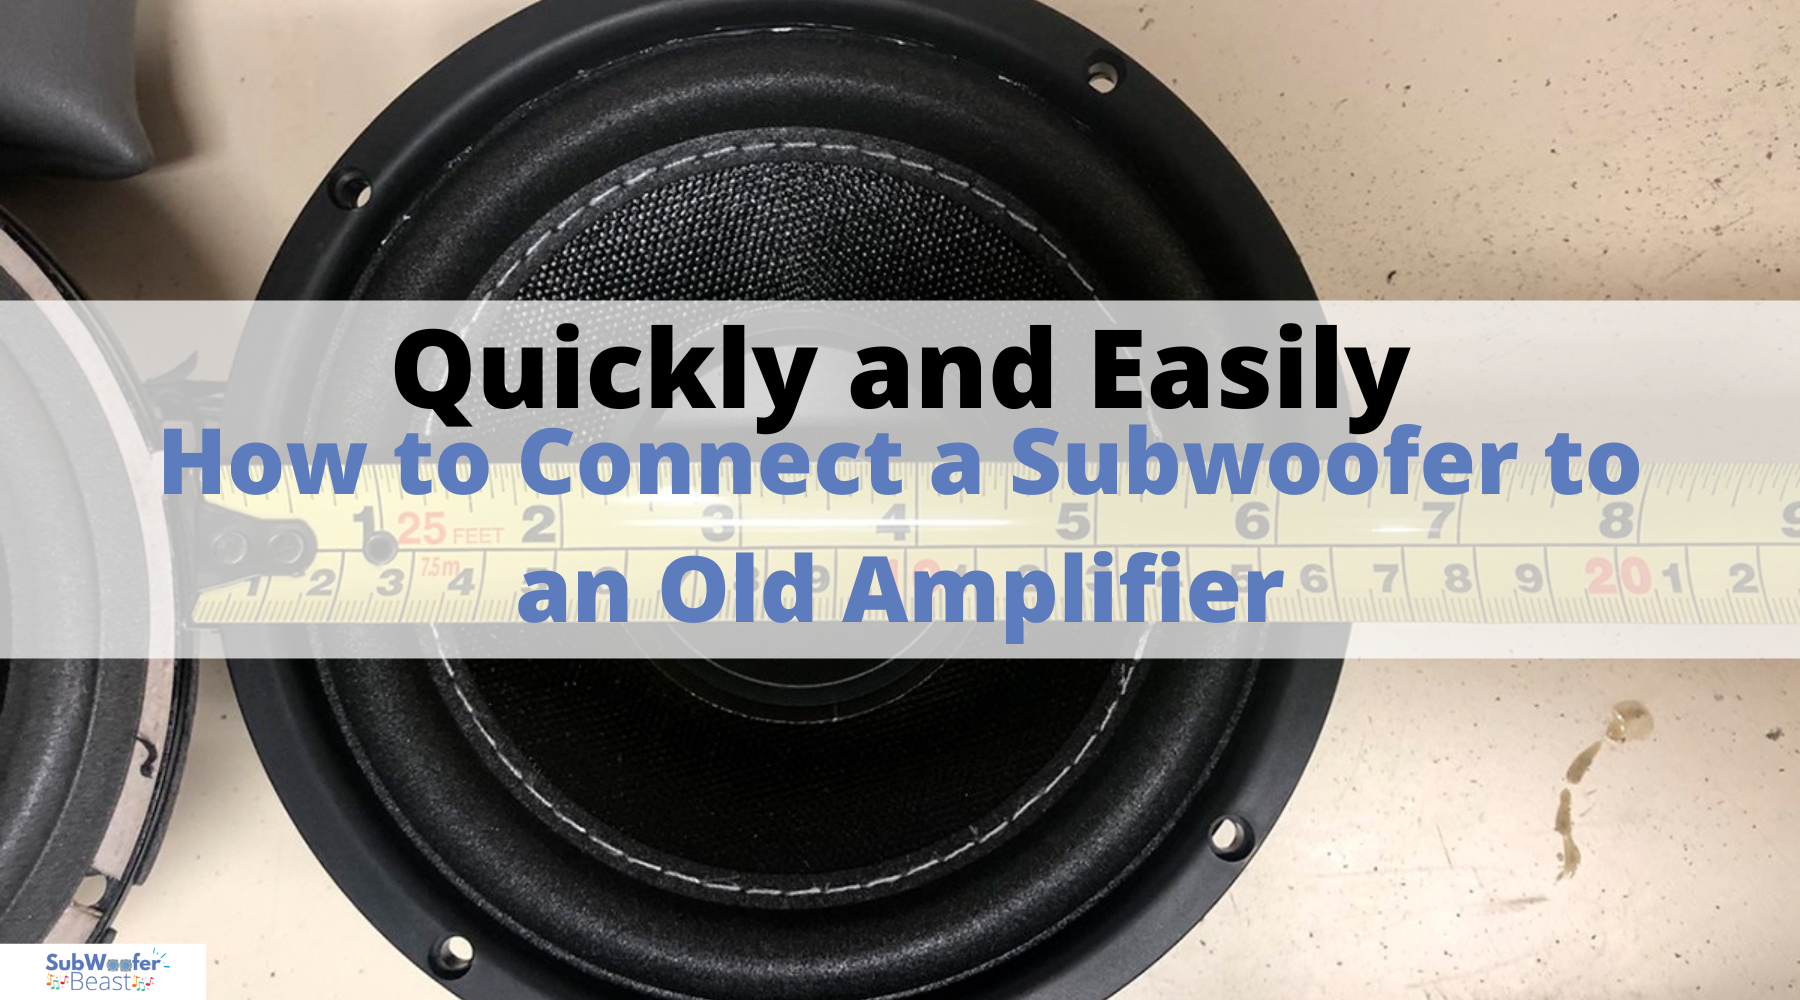 How to Connect a Subwoofer to an Old Amplifier